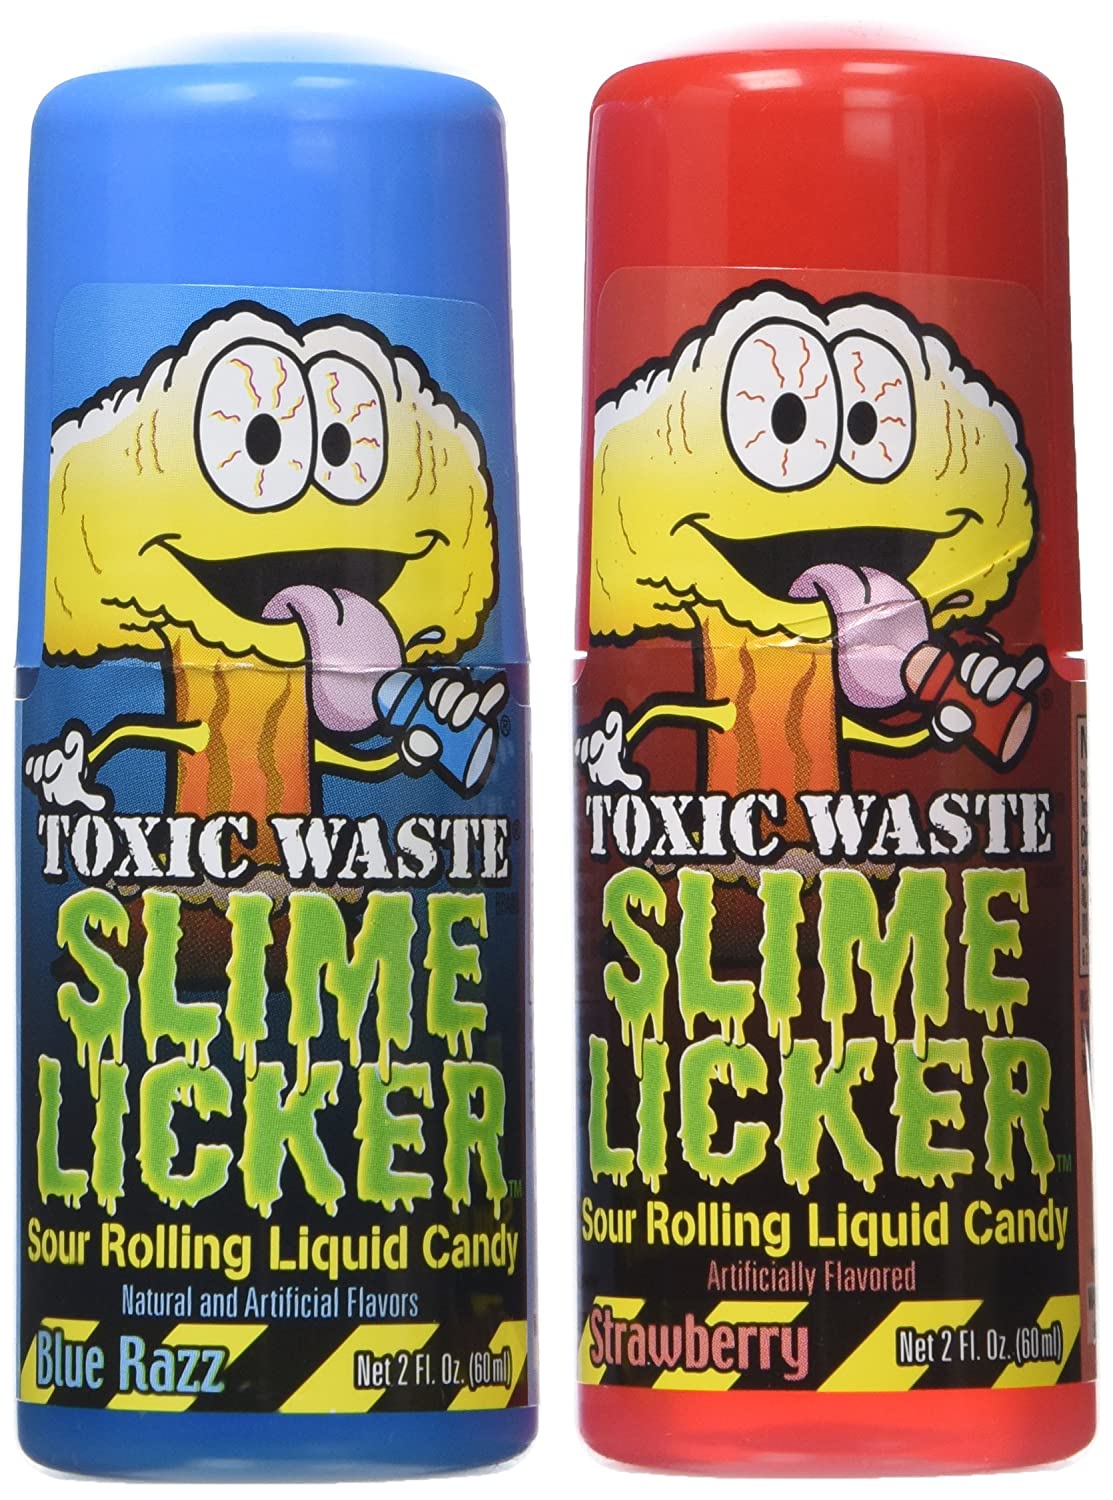 Toxic Waster Slime Licker